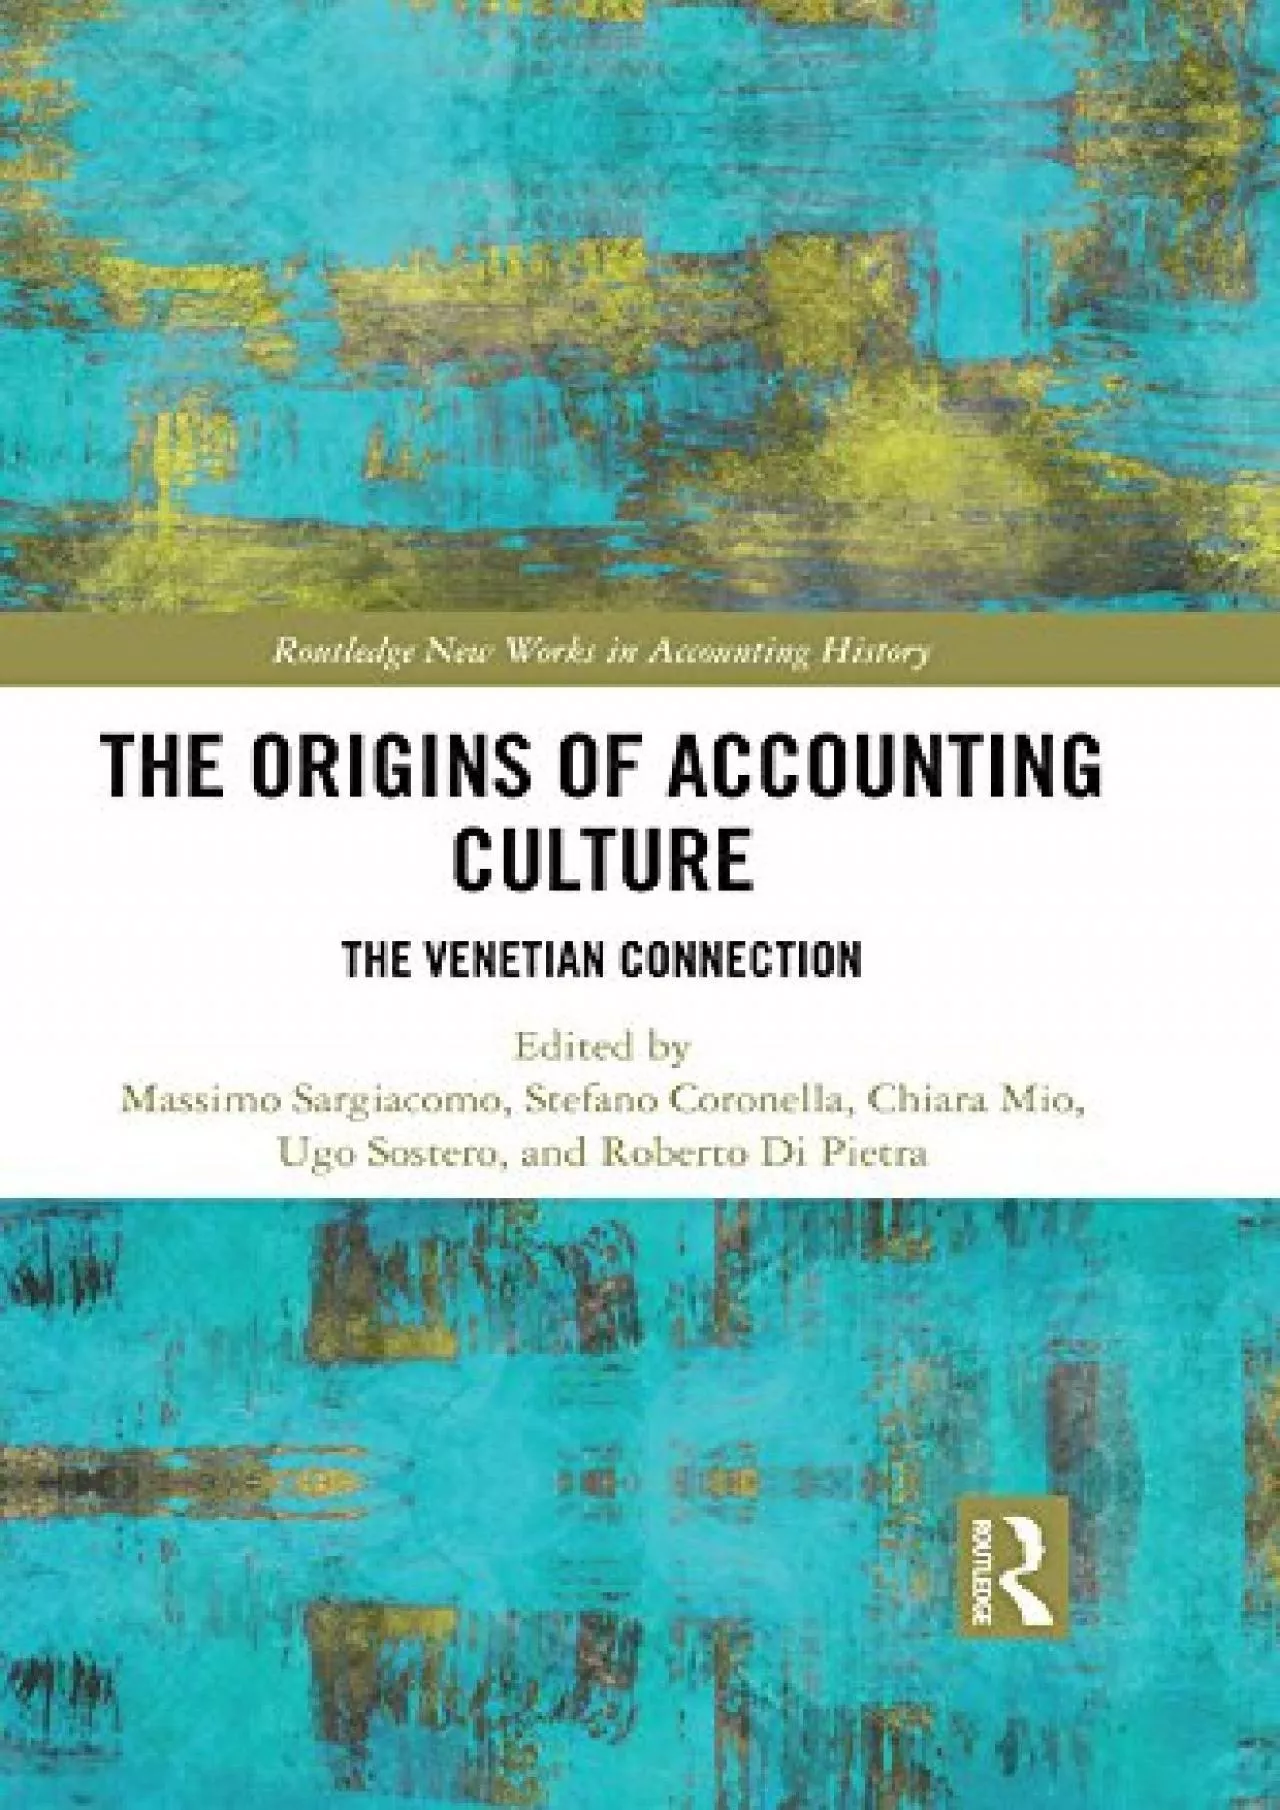 The Origins of Accounting Culture: The Venetian Connection (Routledge New Works in Accounting